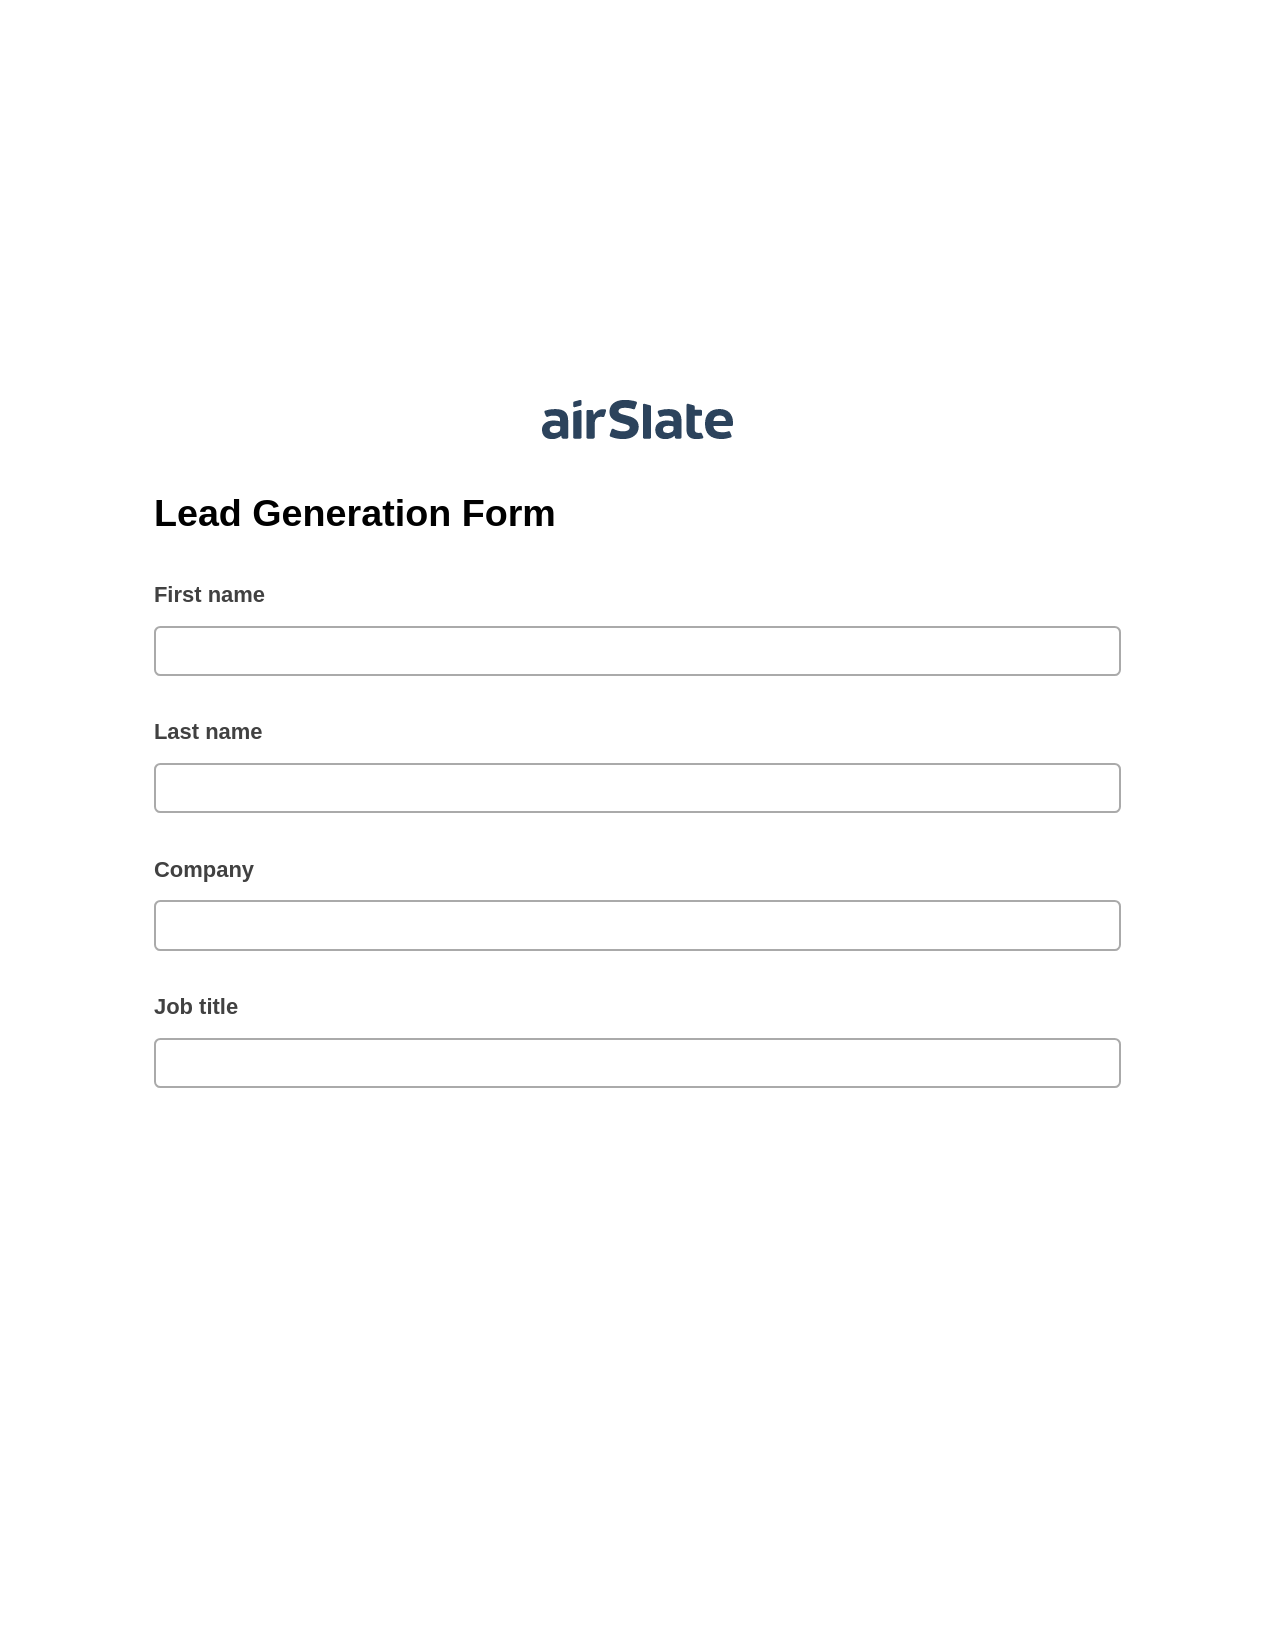 Lead Generation Form Pre-fill from AirTable Bot, Send Mailchimp Campaign Bot, Export to Excel 365 Bot